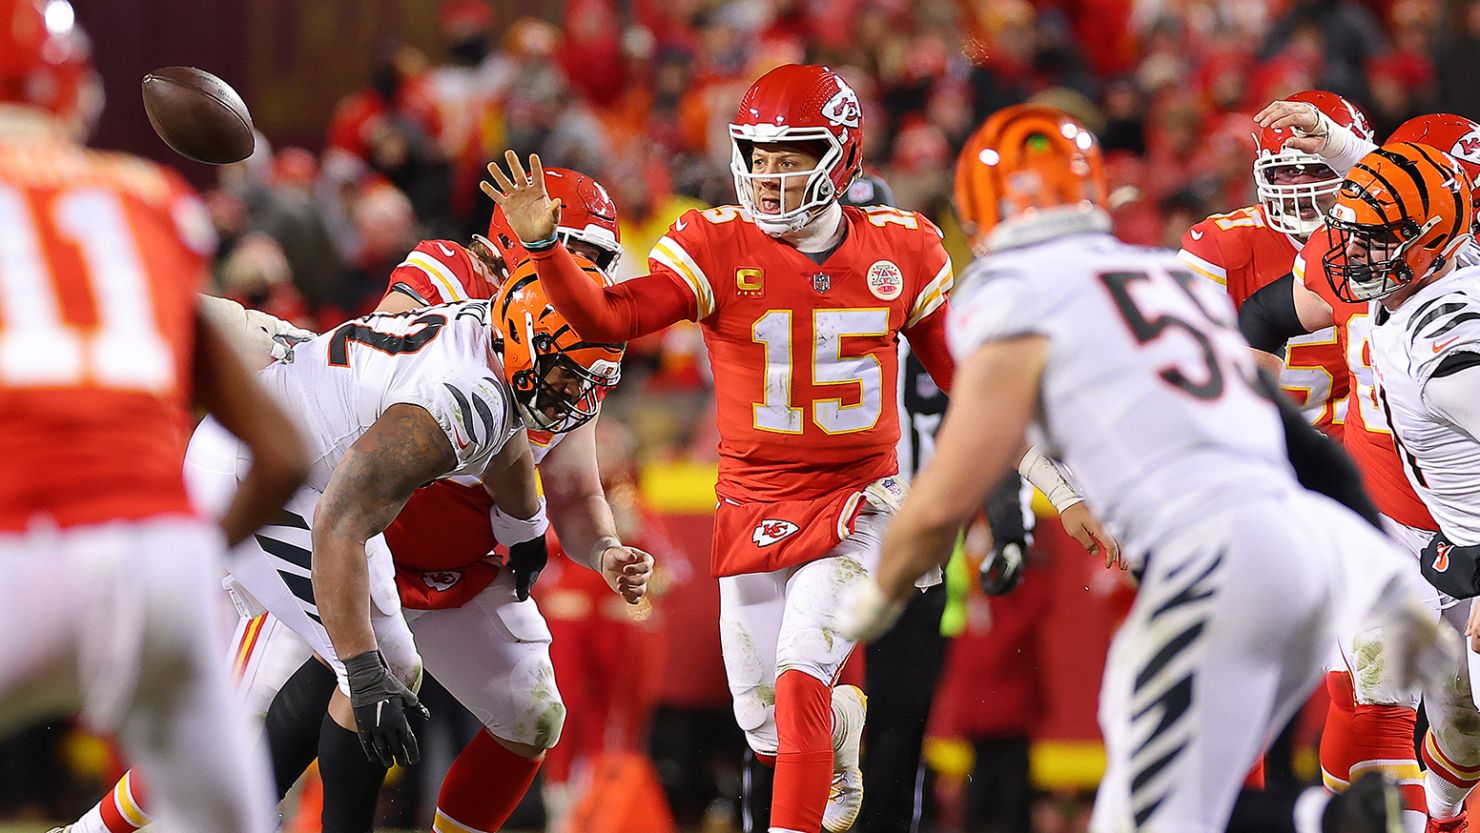 The Kansas City Chiefs' Patrick Mahomes throws a pass against the visiting Cincinnati Bengals during the AFC Championship Game on January 29. 